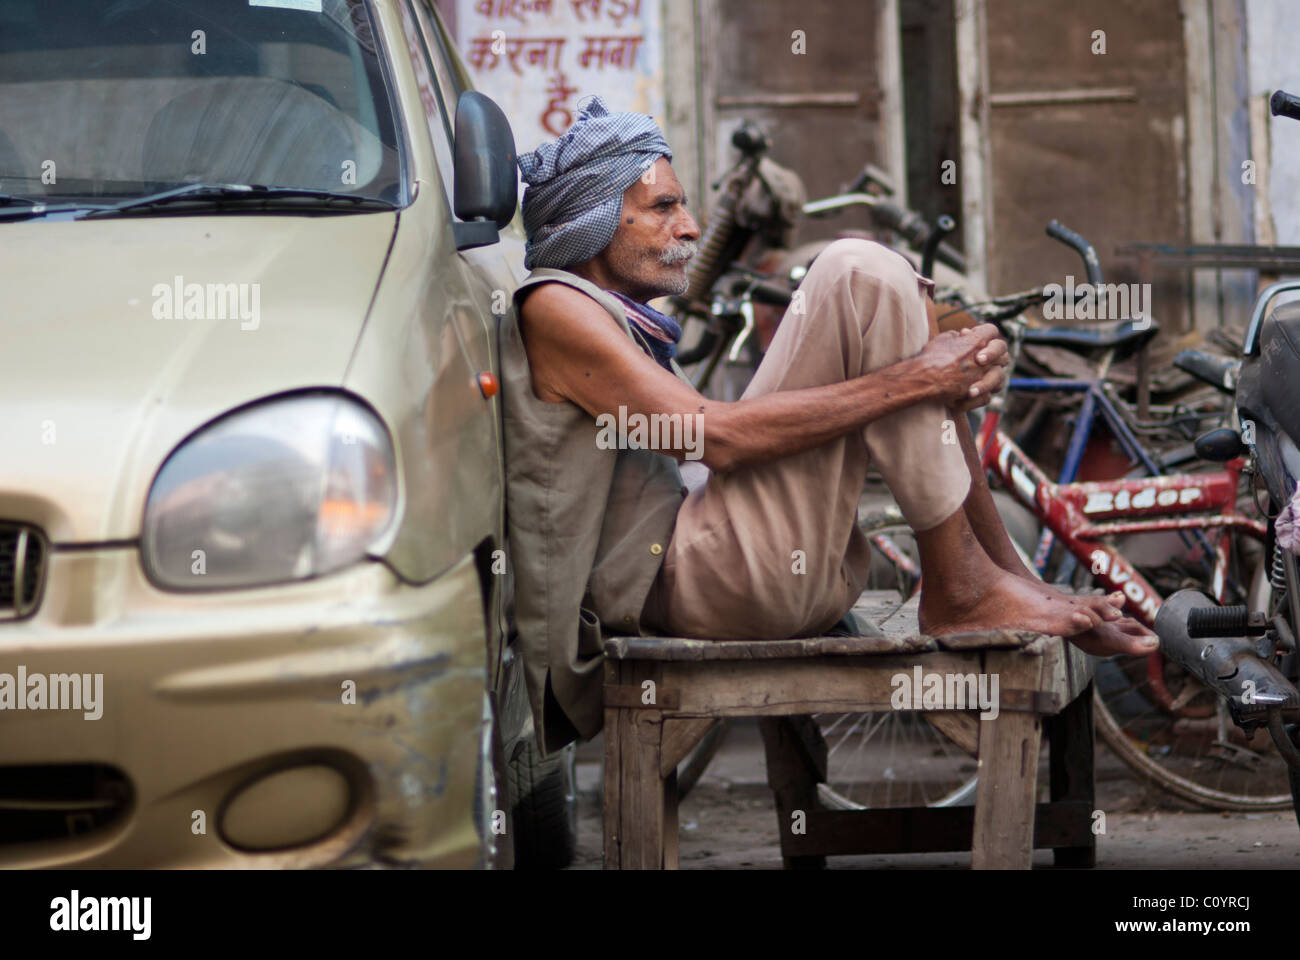 Indian man sitting on a stool on a street leaning against a car Stock Photo